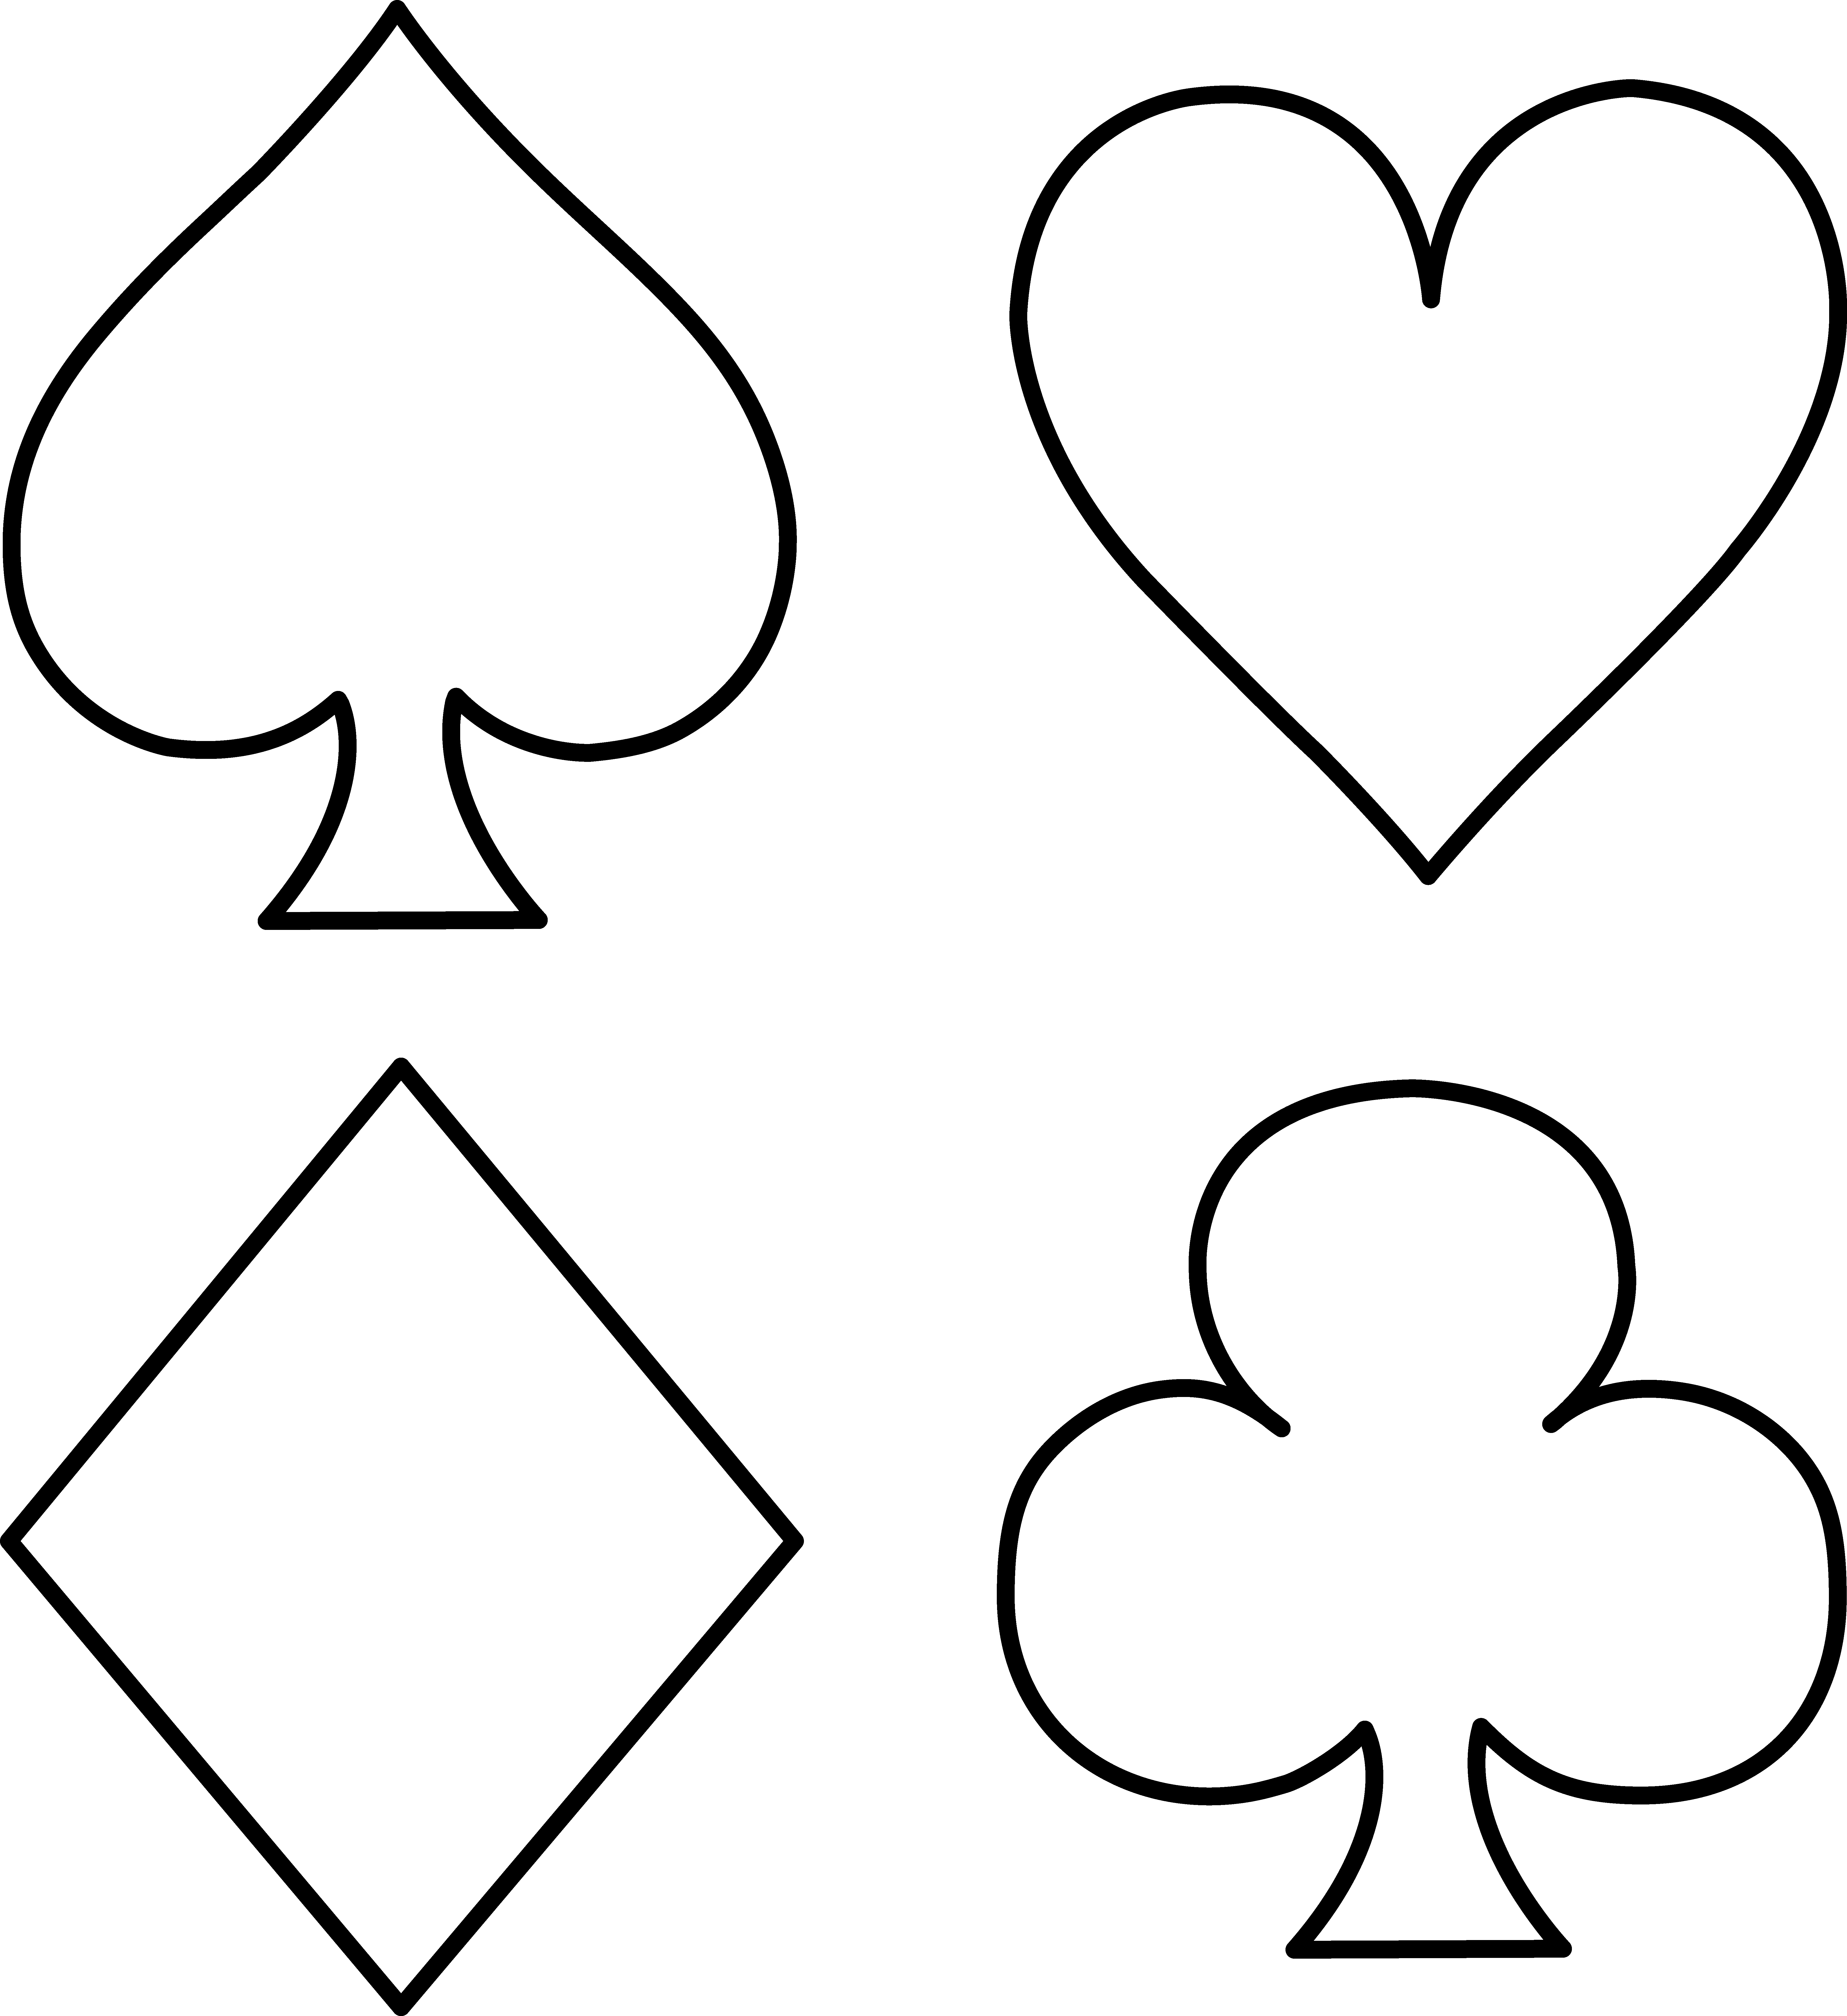 Playing Cards Symbols - ClipArt Best